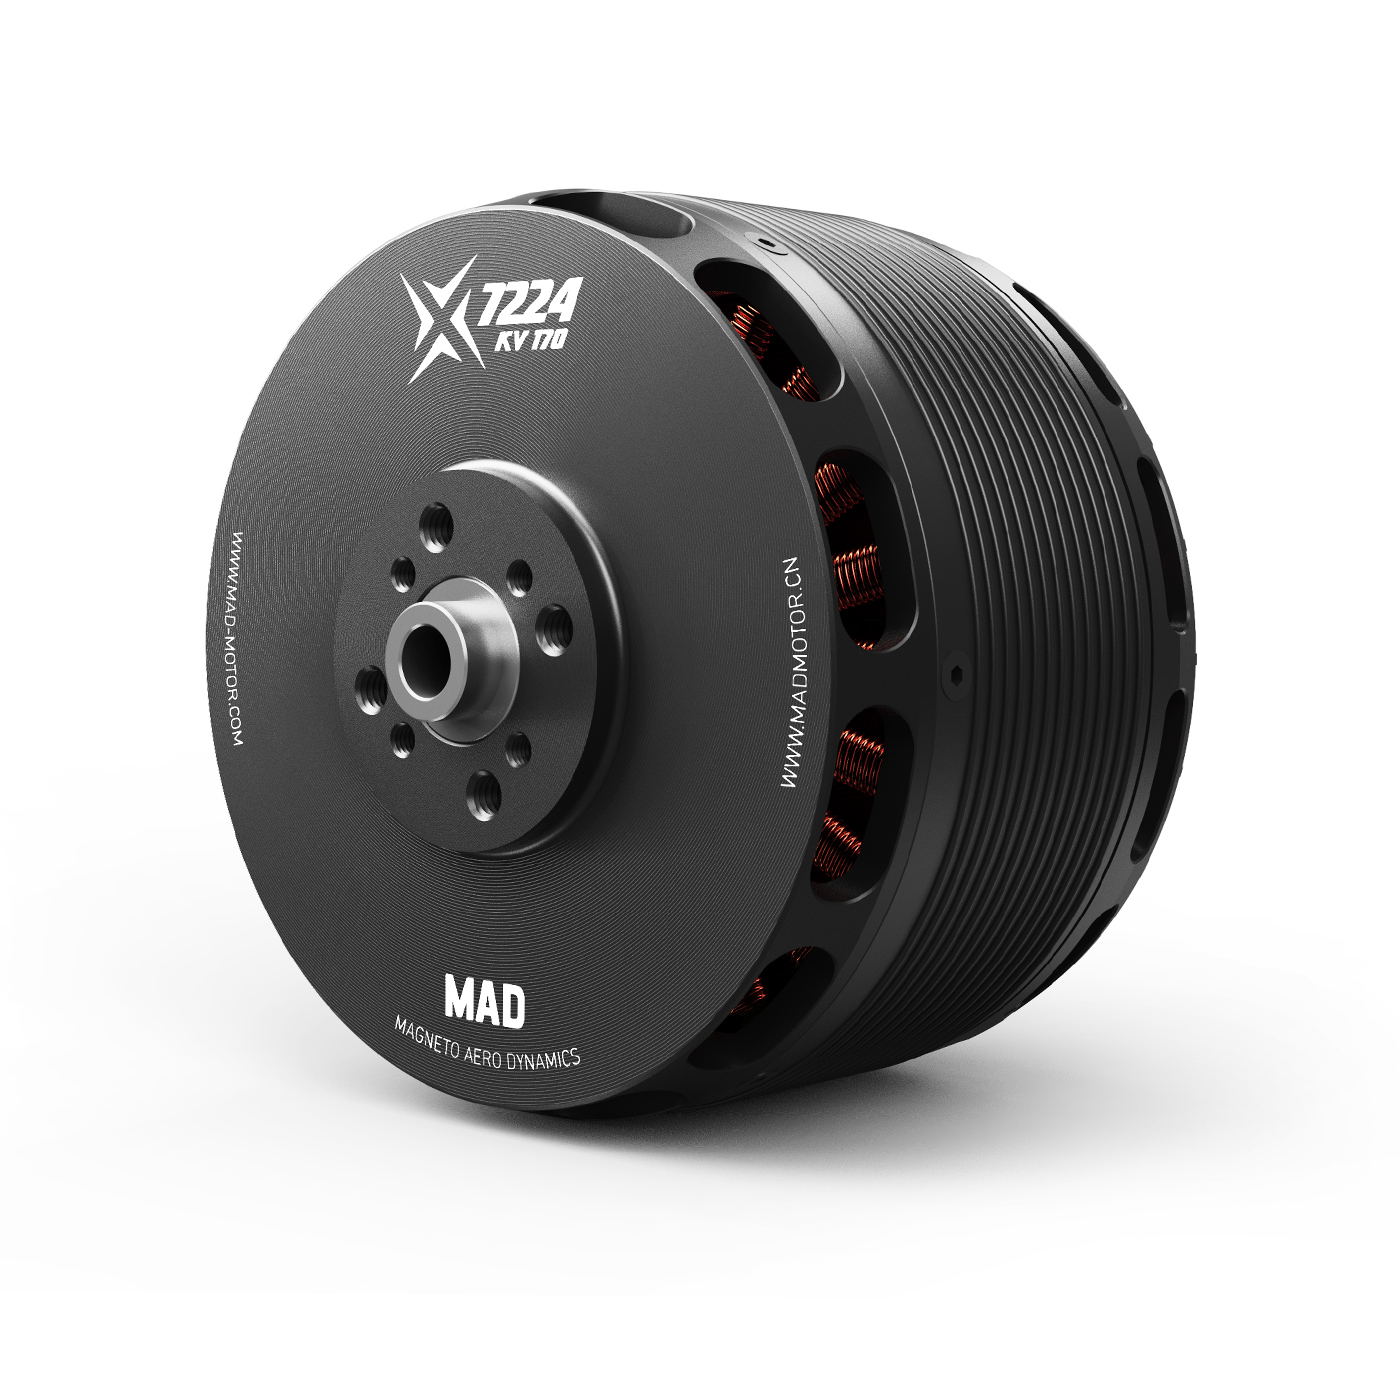 MAD X7224  brushless motor suitable for 120E-170E aircraft,corresponding to gasoline engine about 30-40CC